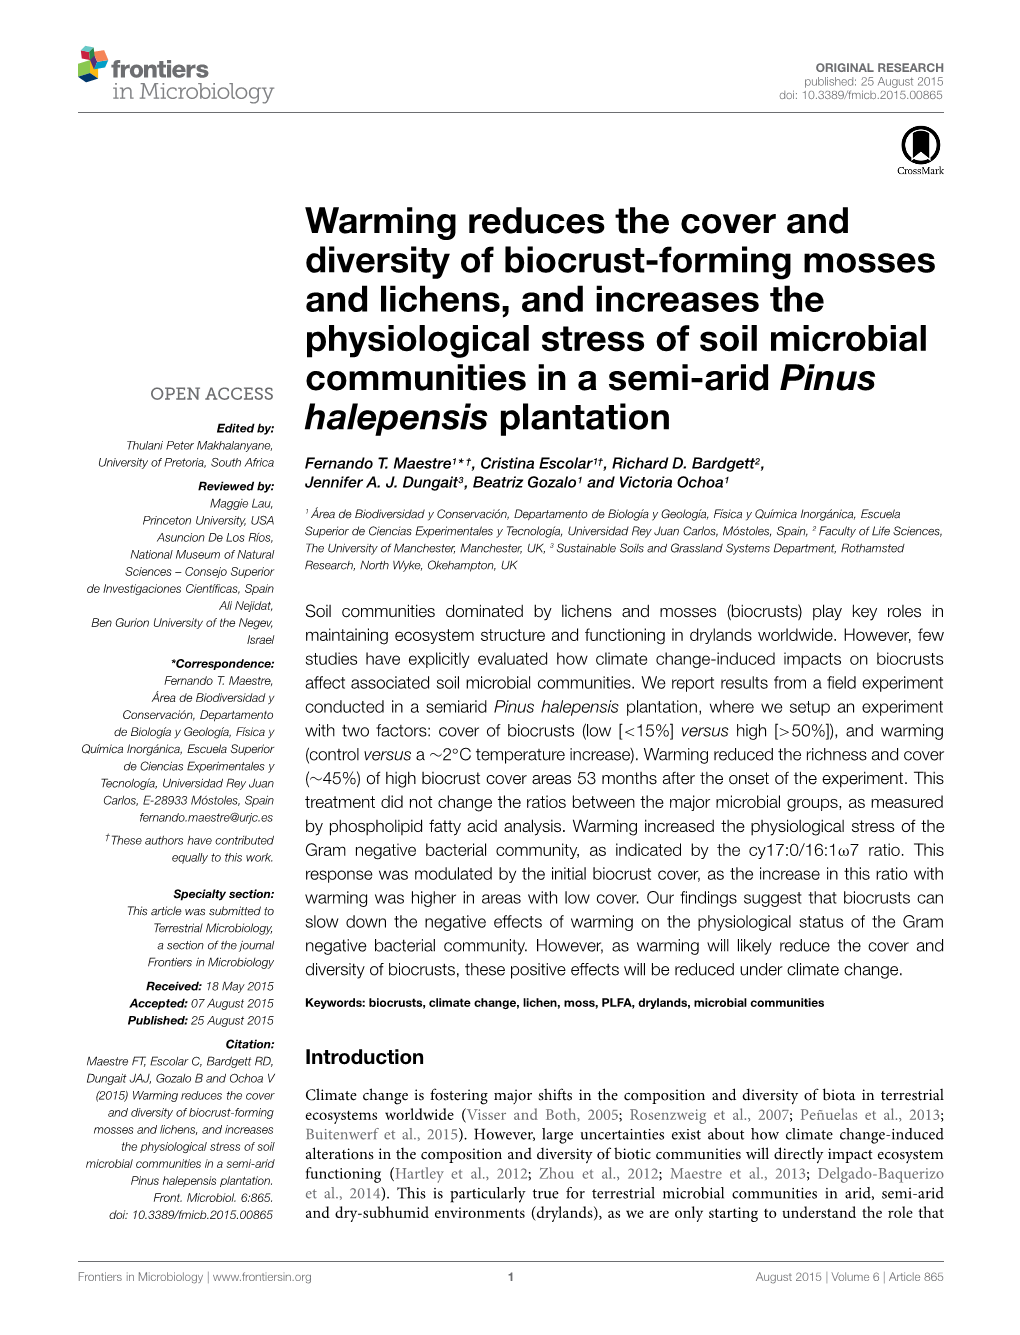 Warming Reduces the Cover and Diversity of Biocrust-Forming Mosses